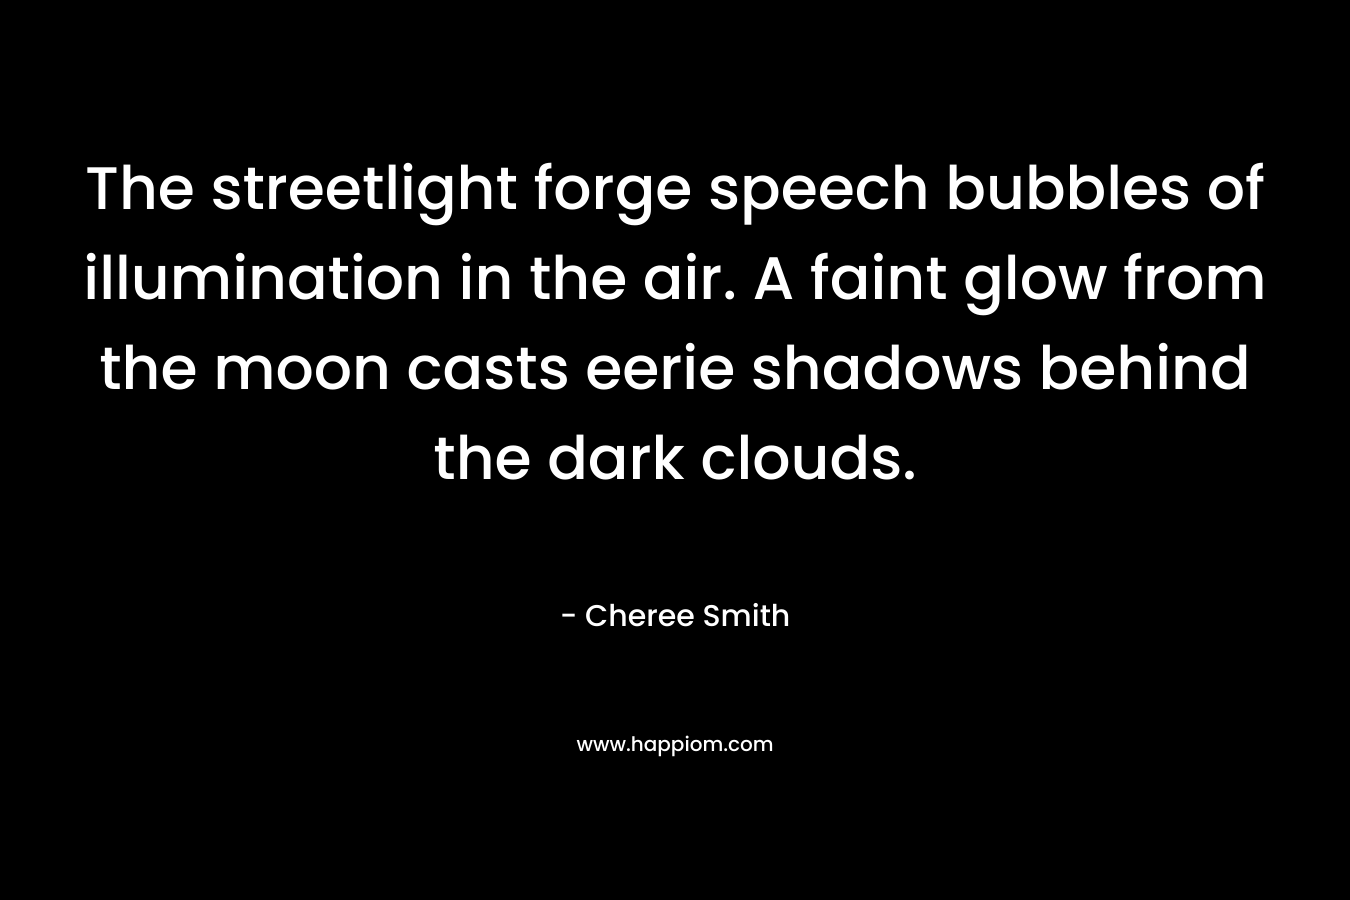 The streetlight forge speech bubbles of illumination in the air. A faint glow from the moon casts eerie shadows behind the dark clouds.